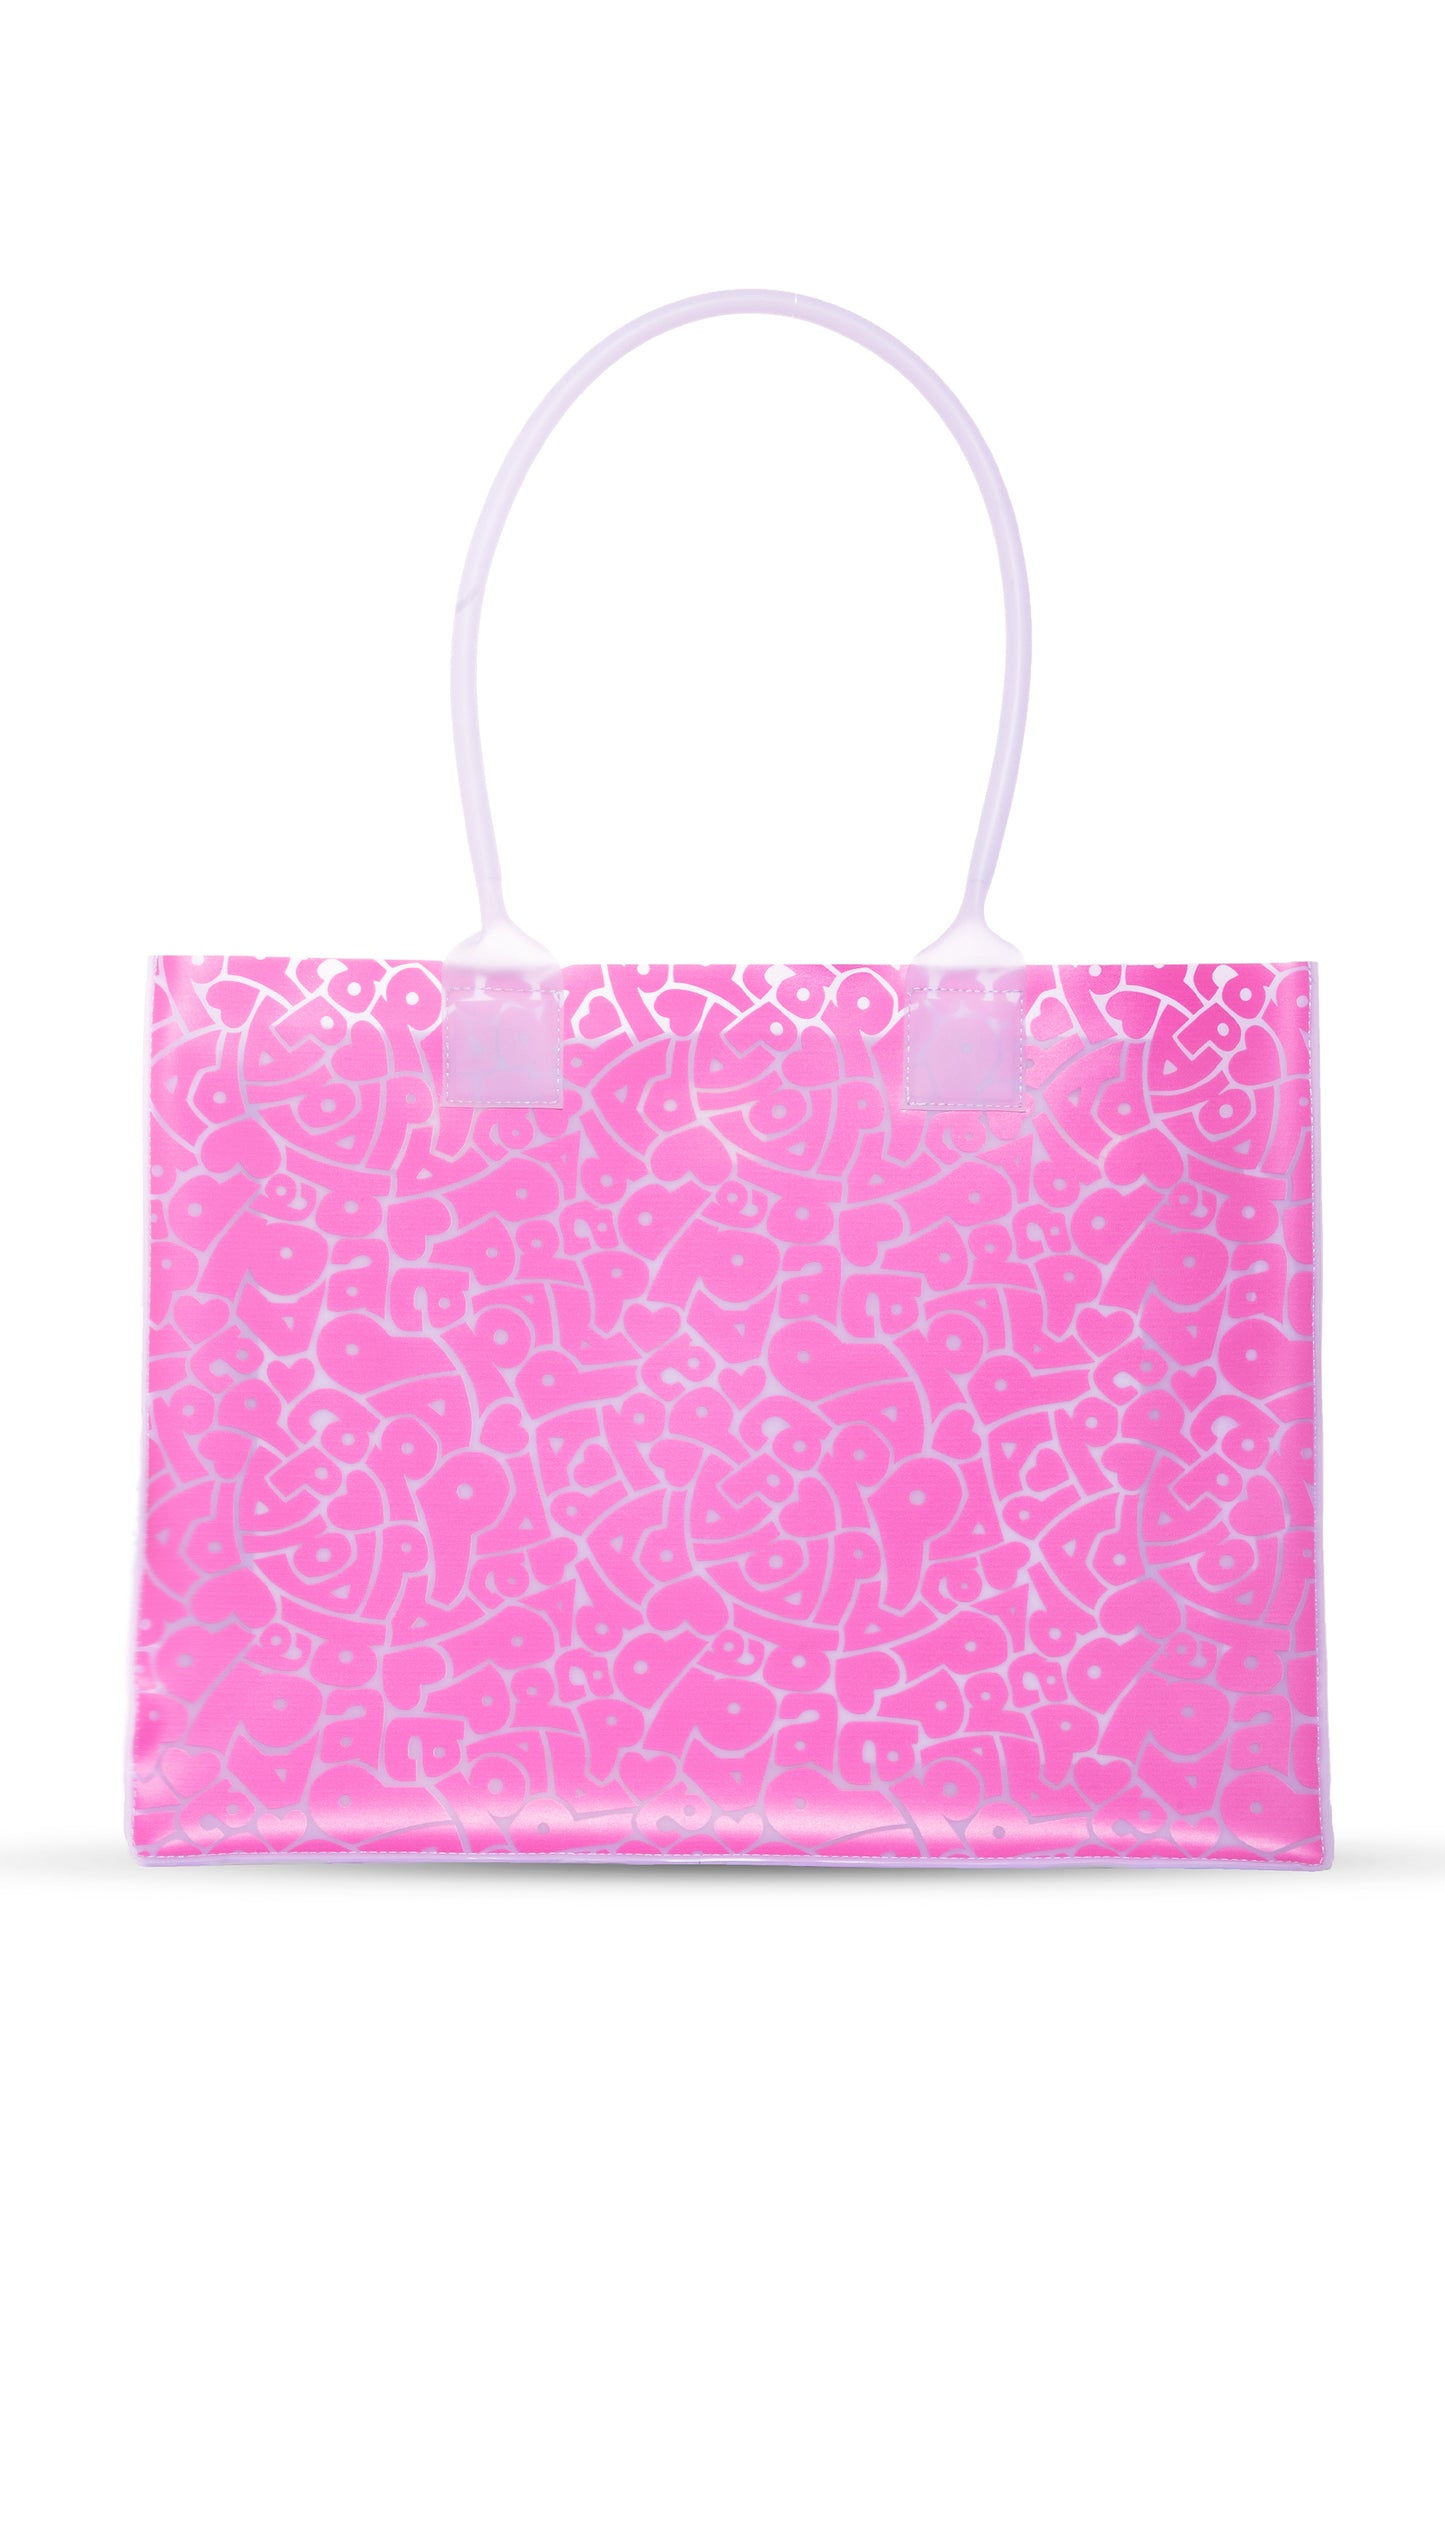 Driving Me Crazy Jelly Tote Bag : Pink